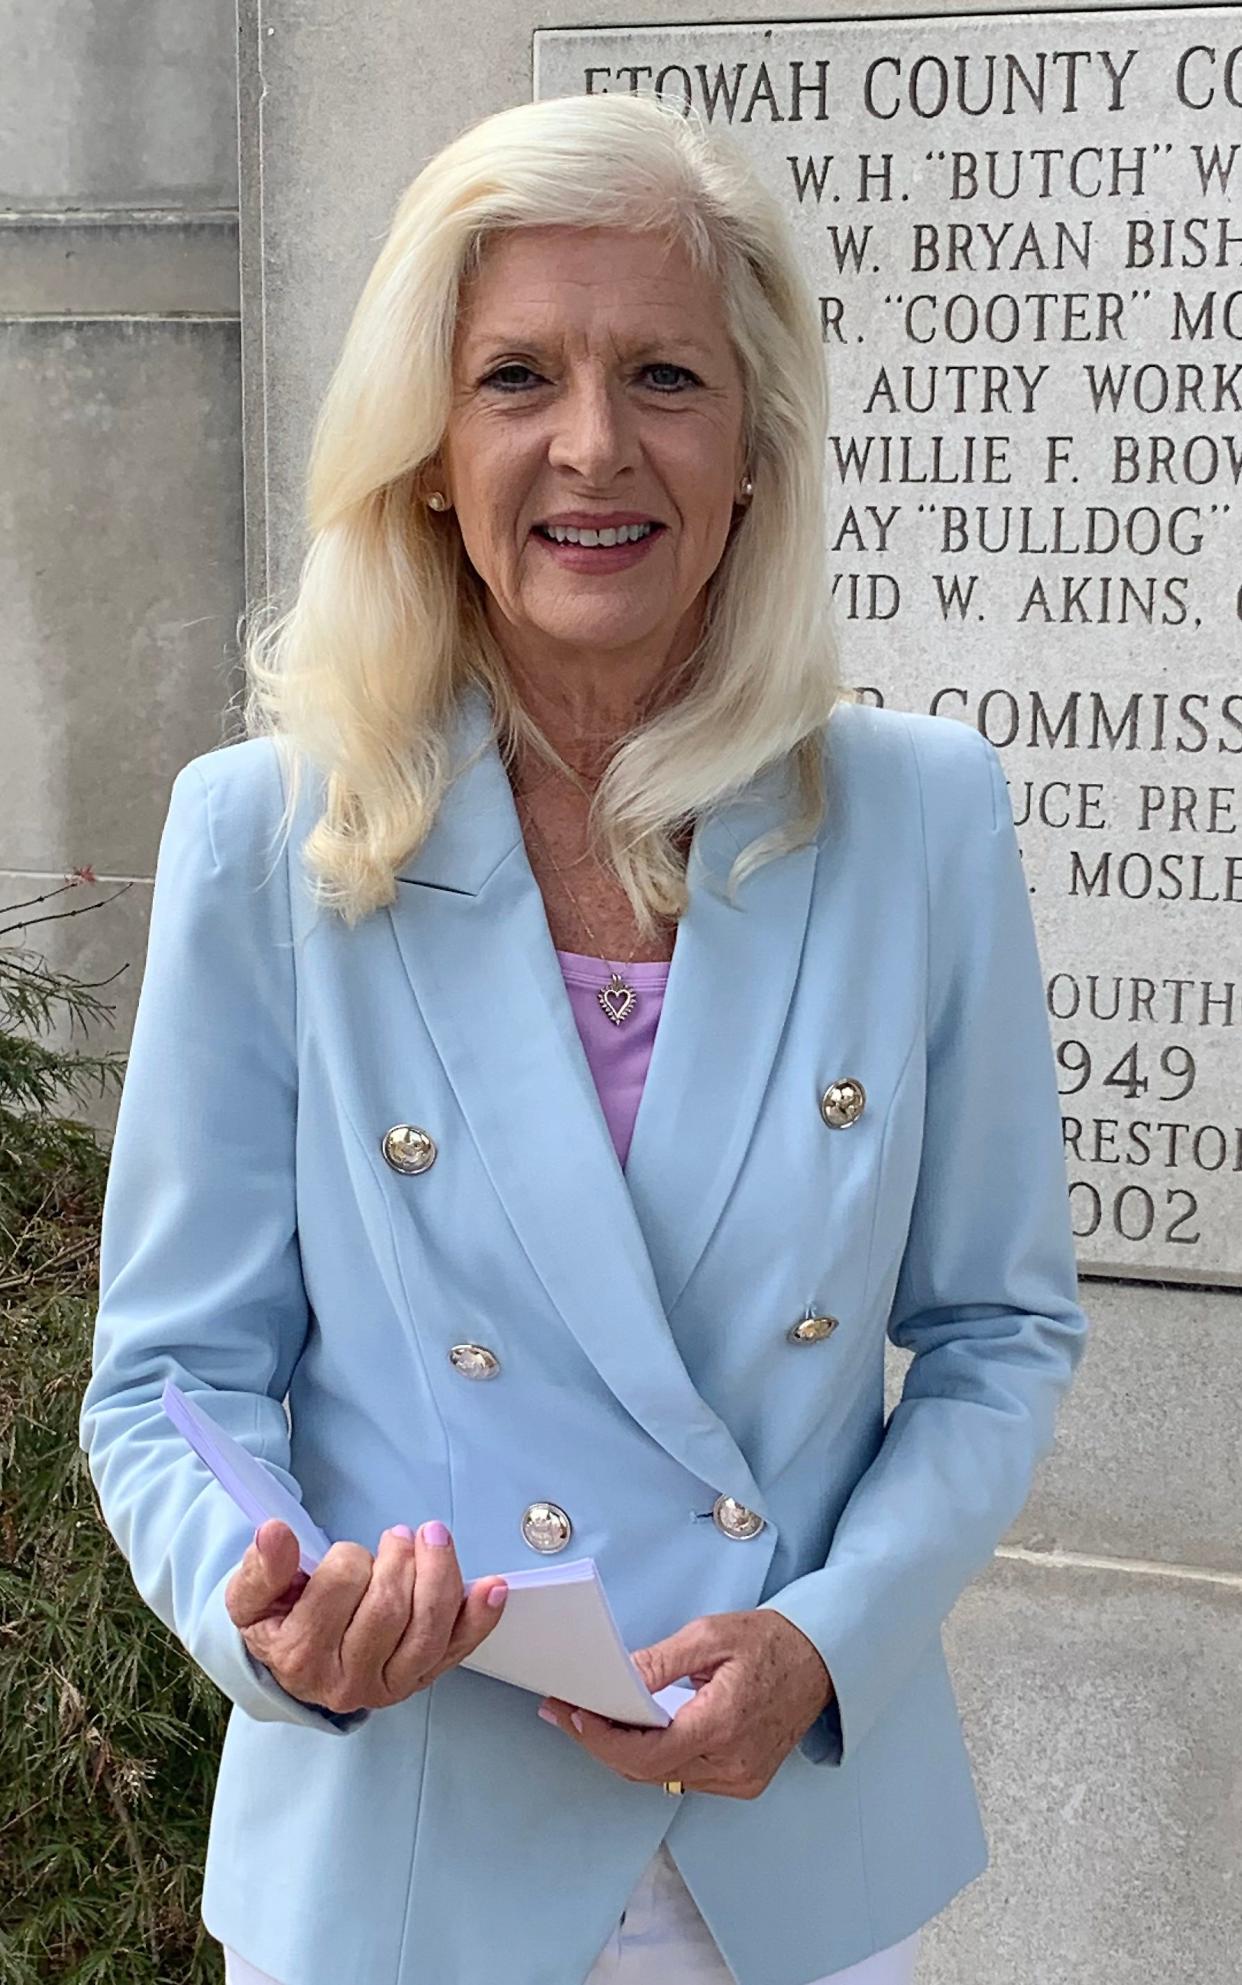 Becky Nordrgren began her new post as Etowah County's revenue commissioner on Oct. 1, after serving 11 years in the Alabama Legislature.